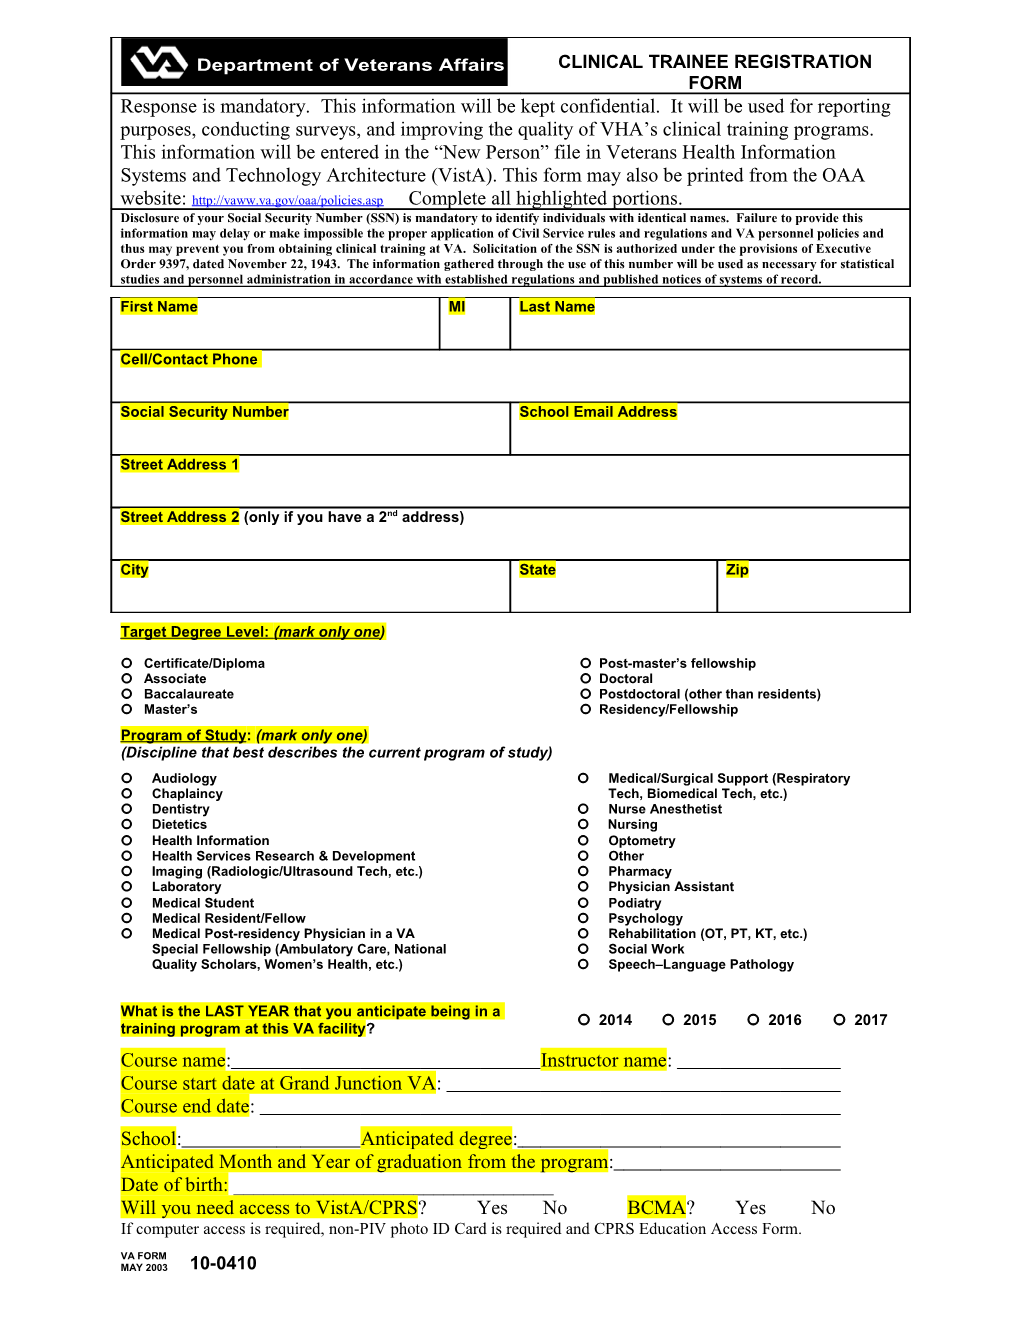 Clinical Trainee Registration Form